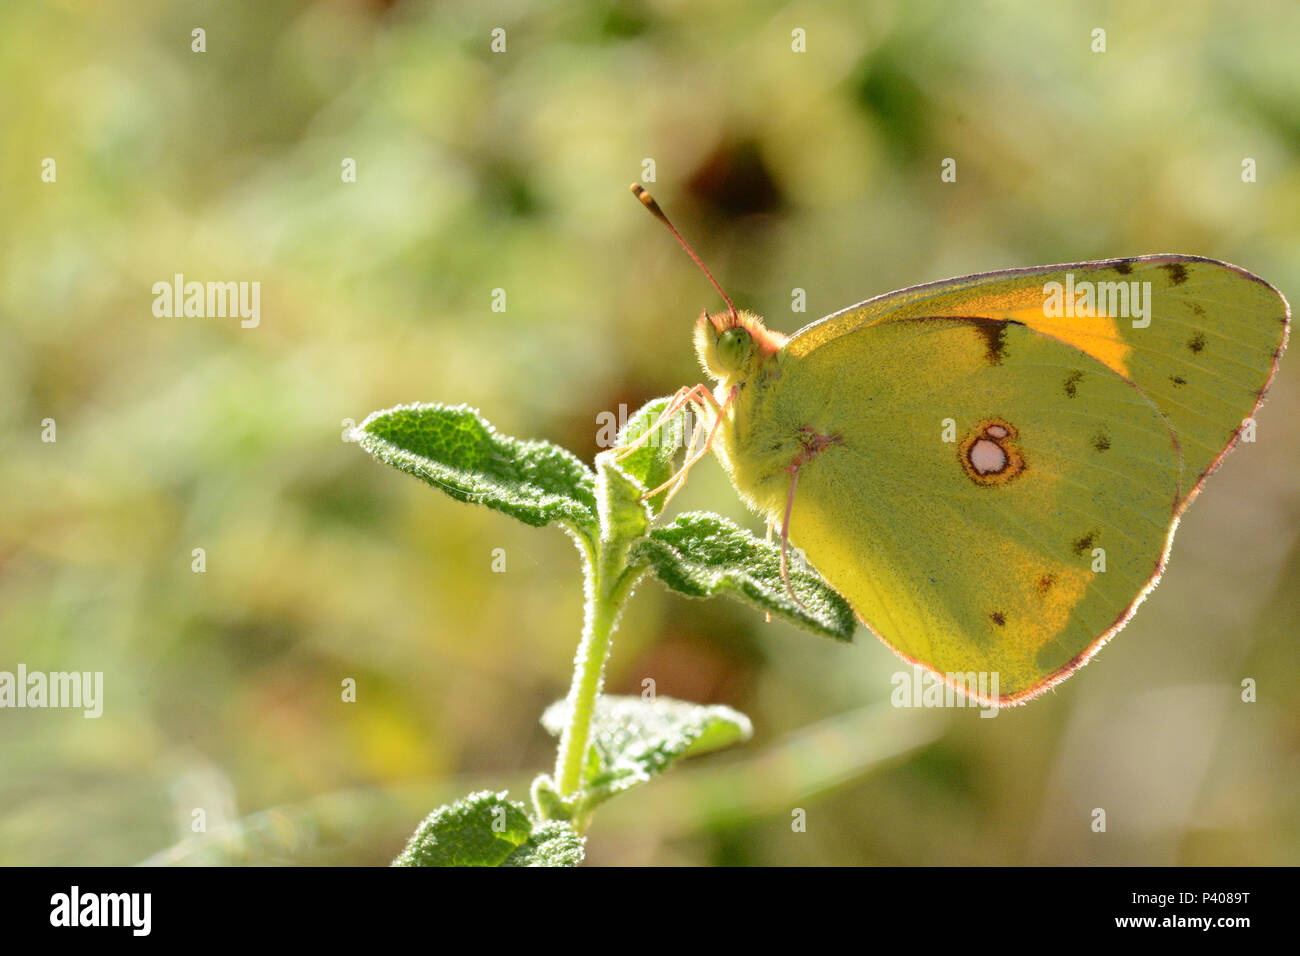 The world of insects. Butterfly of the species Colias croceus, laid on a blade of grass just before sunset Stock Photo